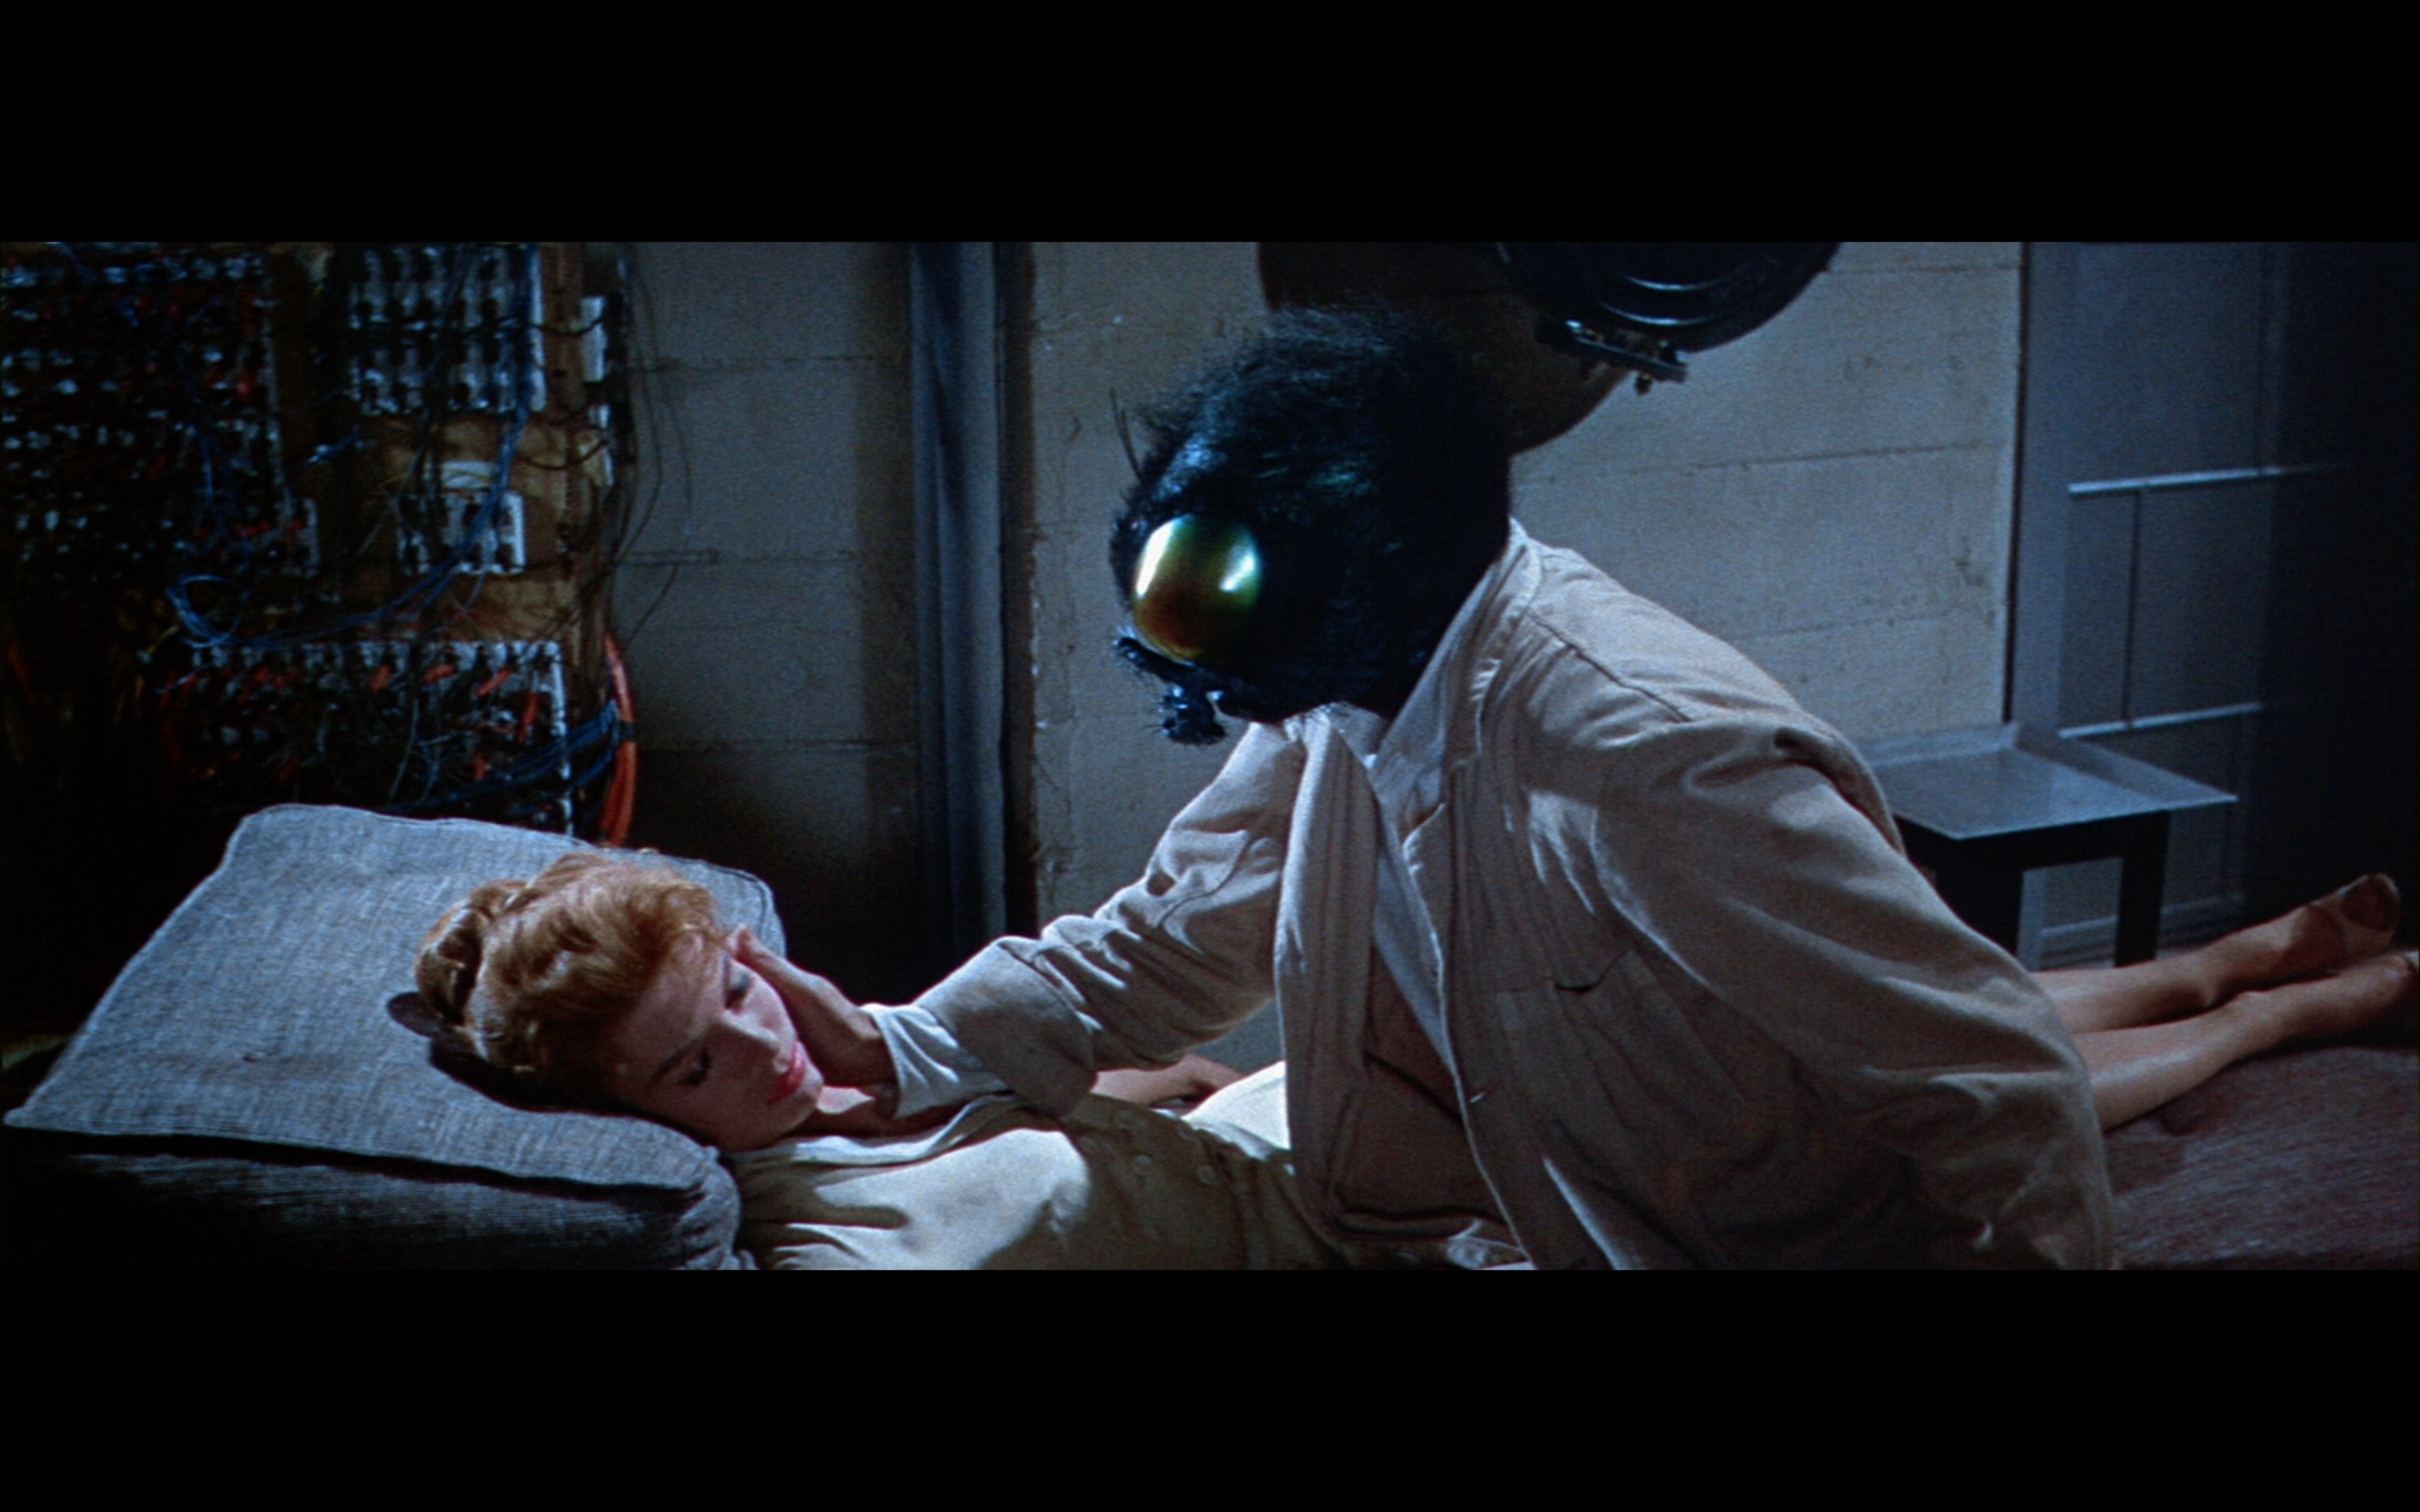 The Fly (1958) arrives with what appears to be an identical 2.35:1 1080p tr...